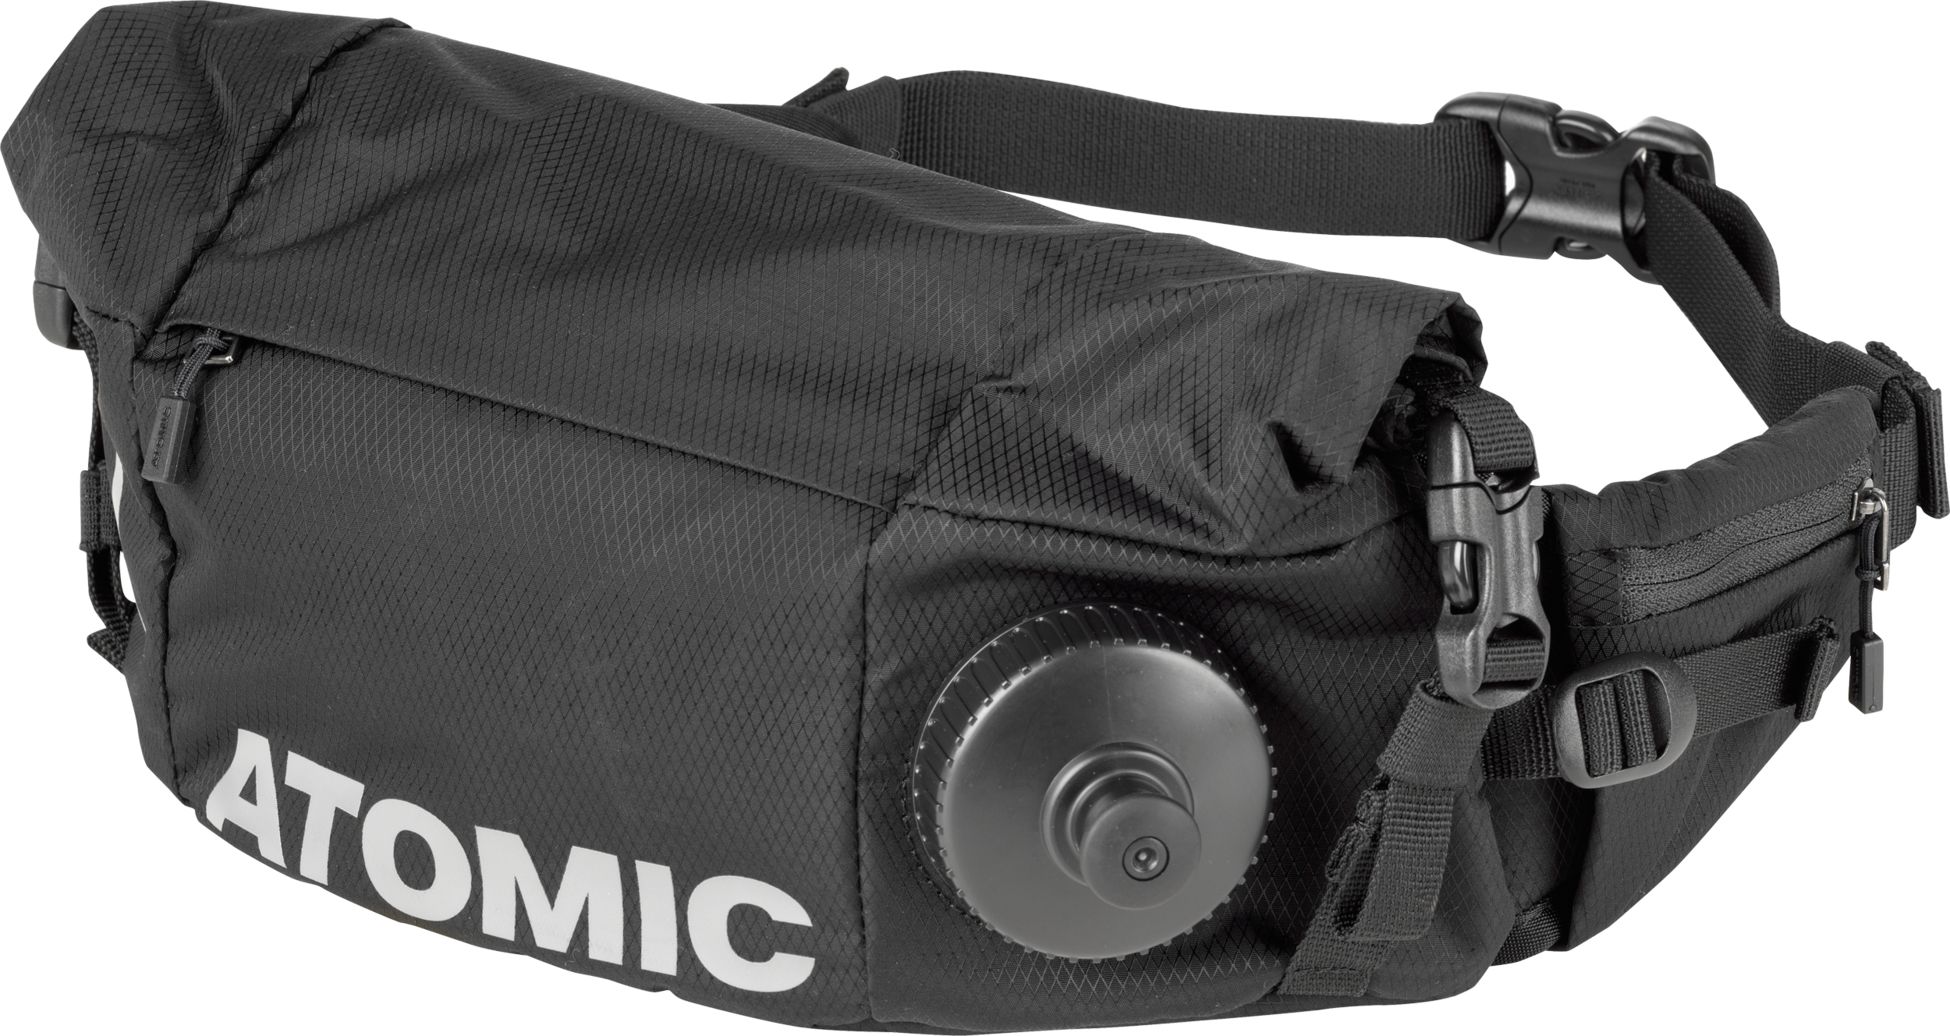 ATOMIC, NORDIC THERMO BOTTLE BELT